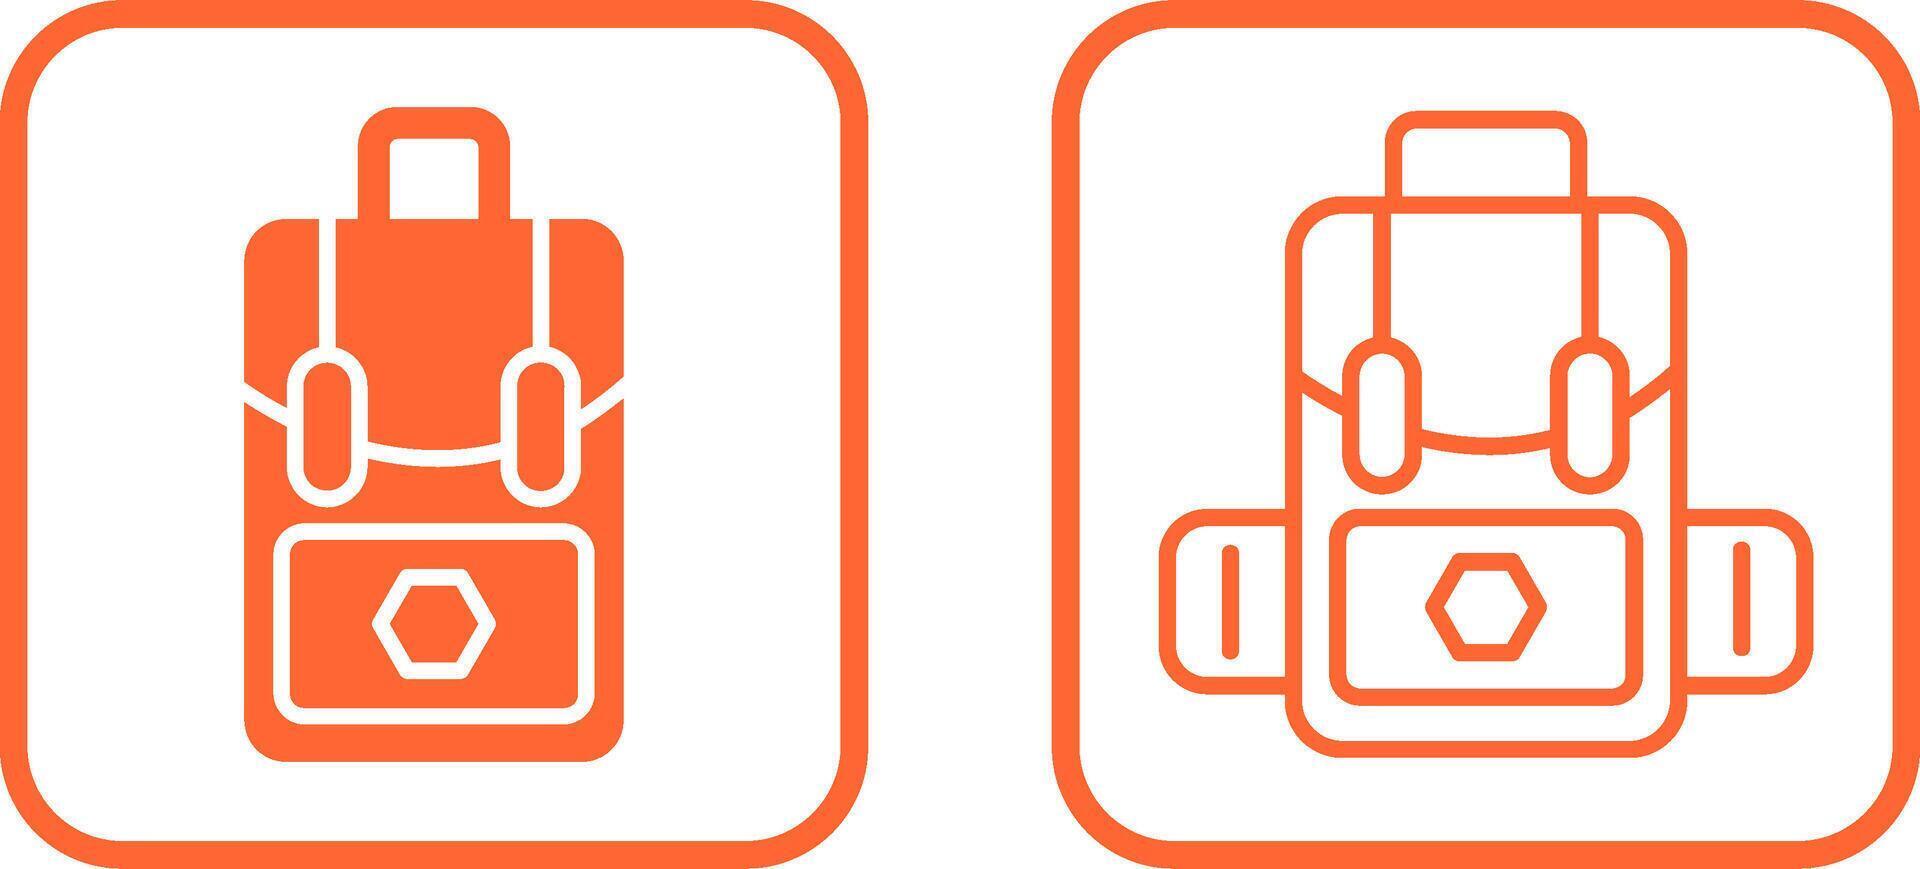 Bag Pack Vector Icon